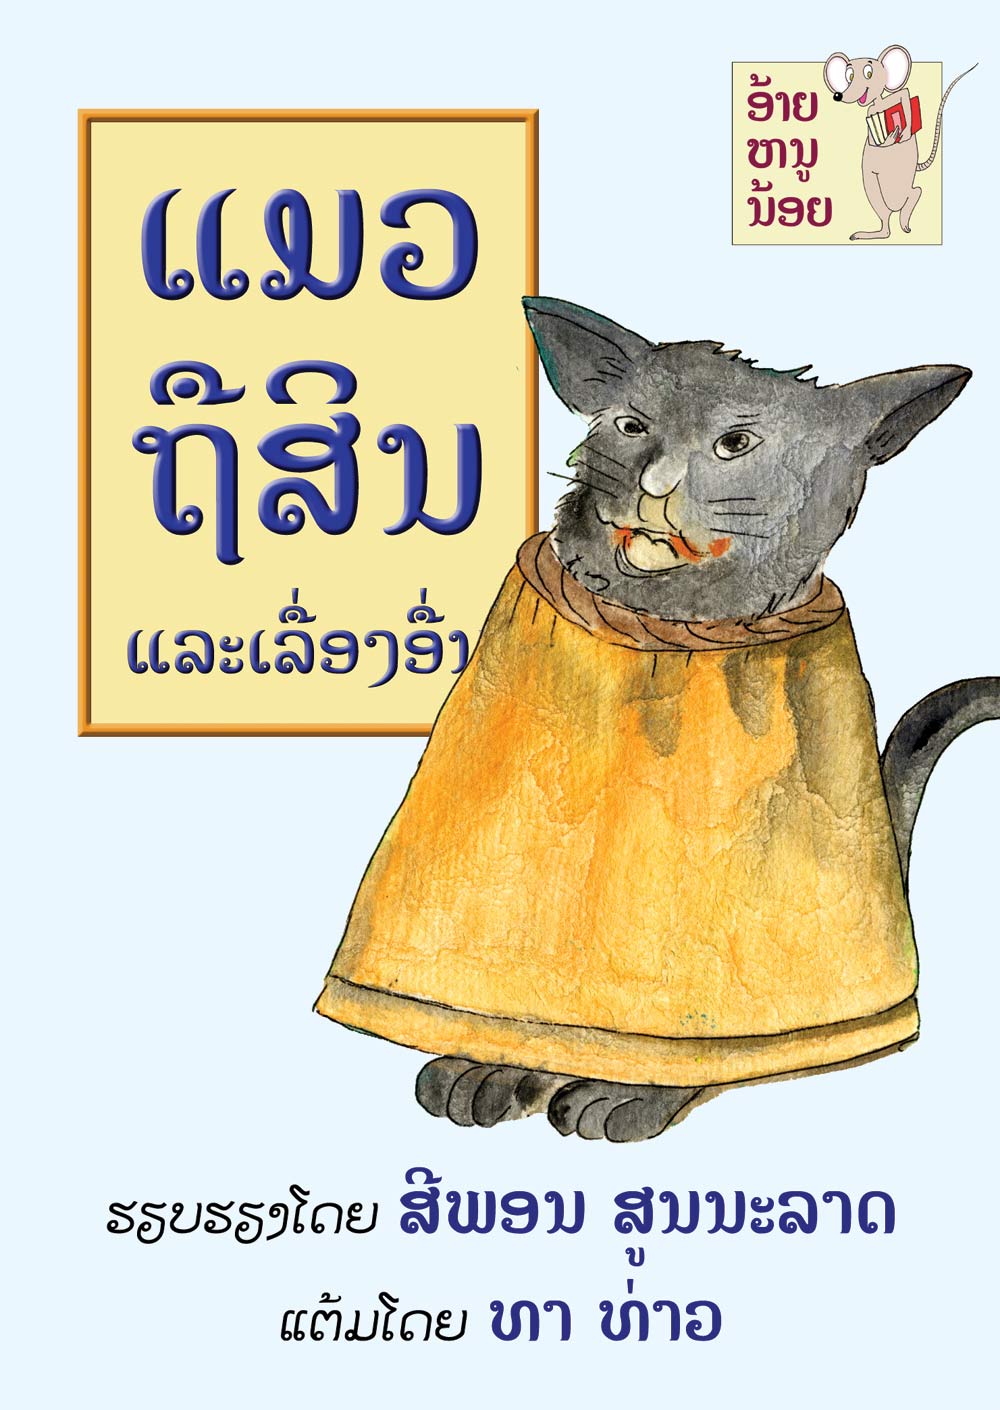 The Cat that Meditated large book cover, published in Lao language